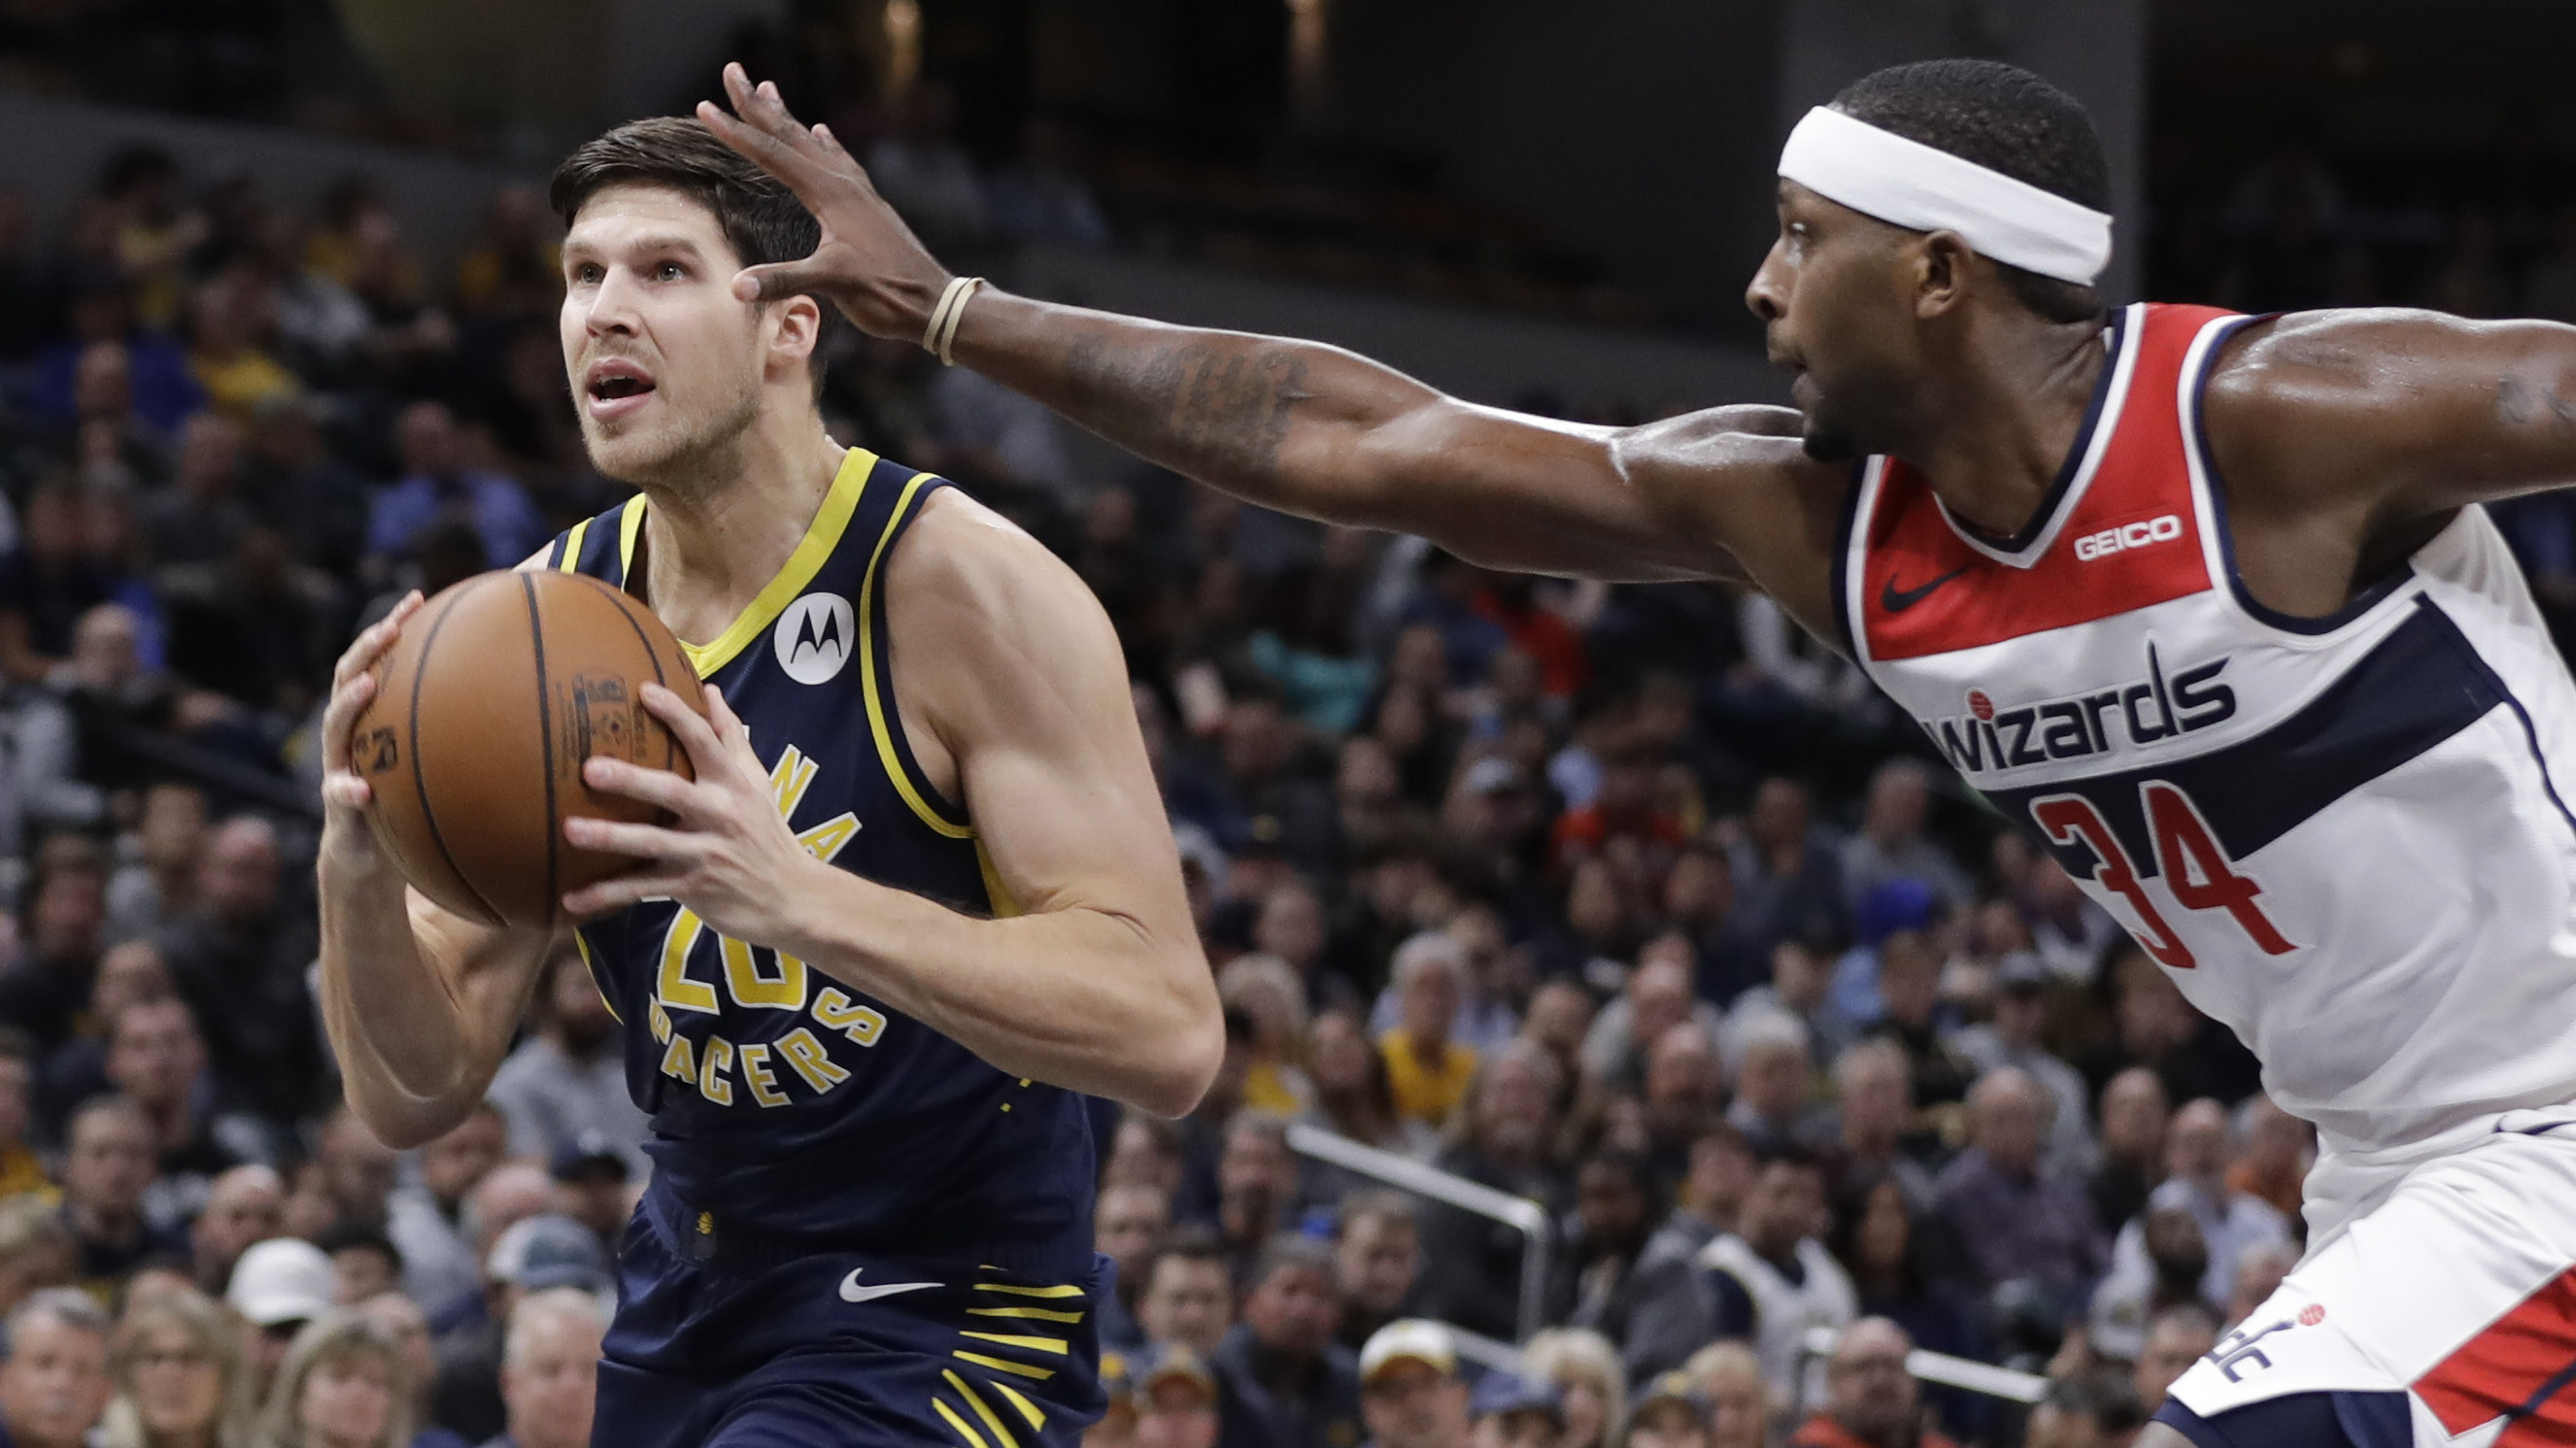 Seven players score in double figures as Pacers defeat Wizards 121-106